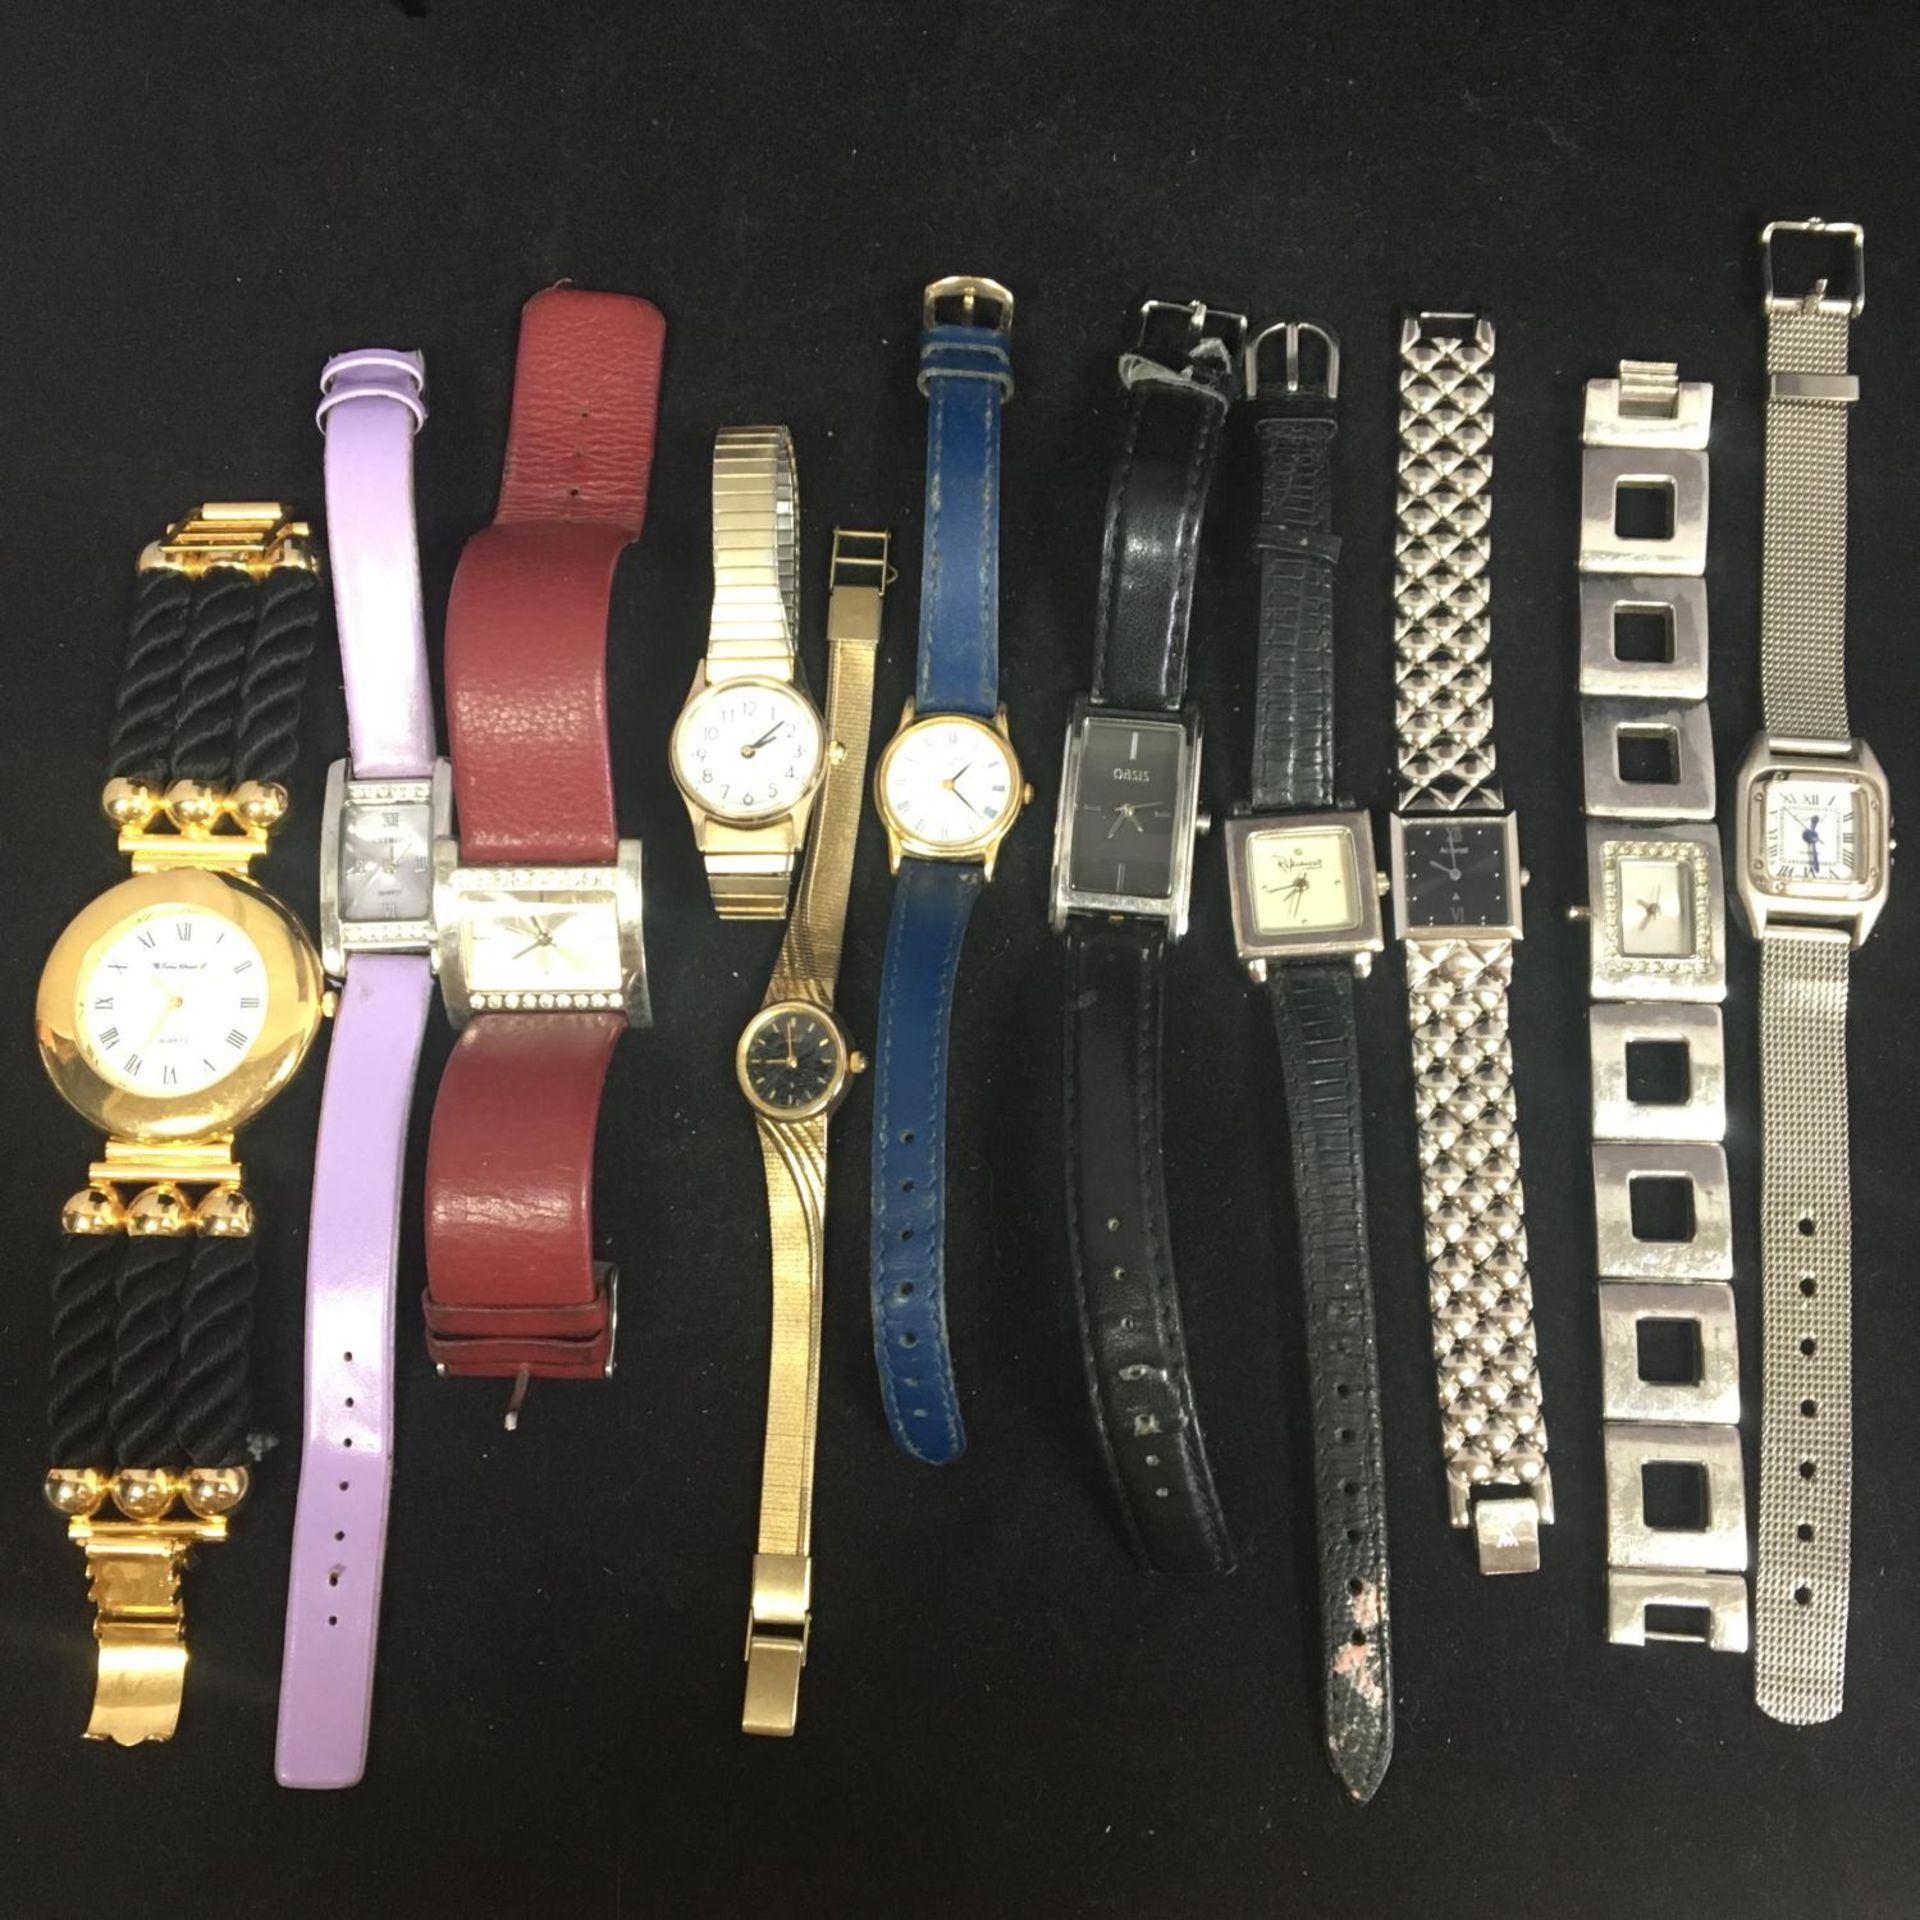 Quantity of various preowned watches to include Pulsar, Accurist, Citizen, Sekonda etc. None are